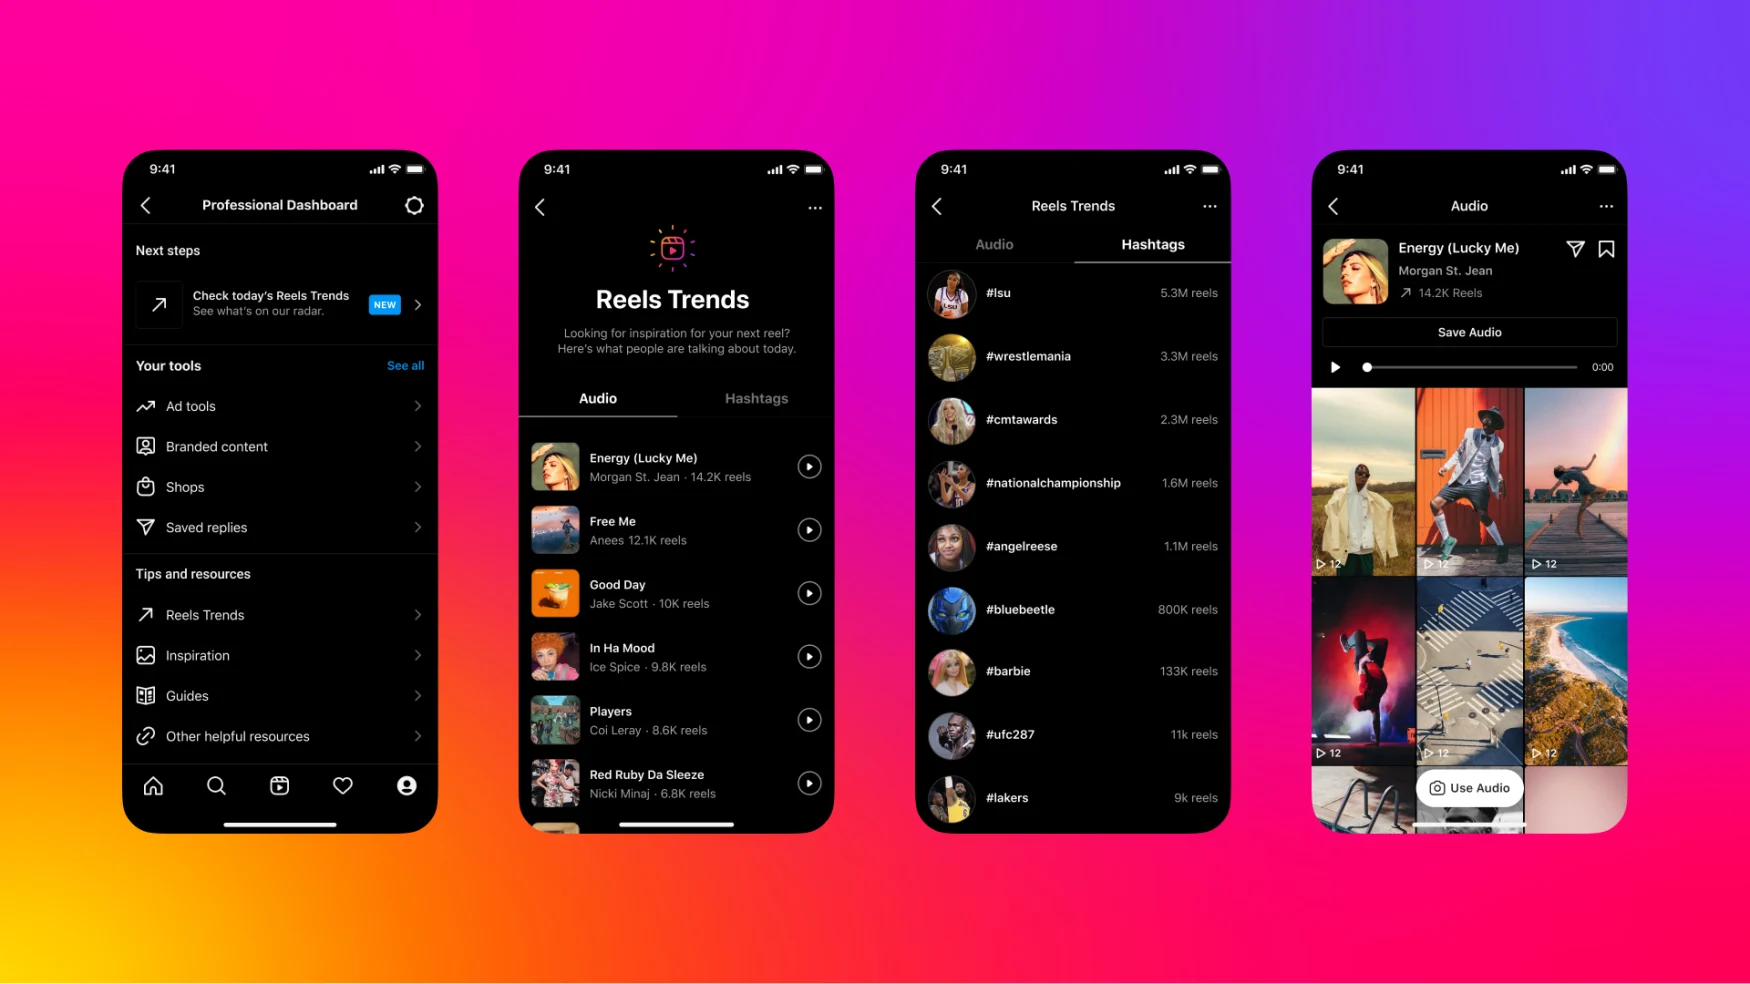 Screenshots showing the Reels Trends page on Instagram. The tab is designed to help creators find out which songs and hashtags are trending on the platform.